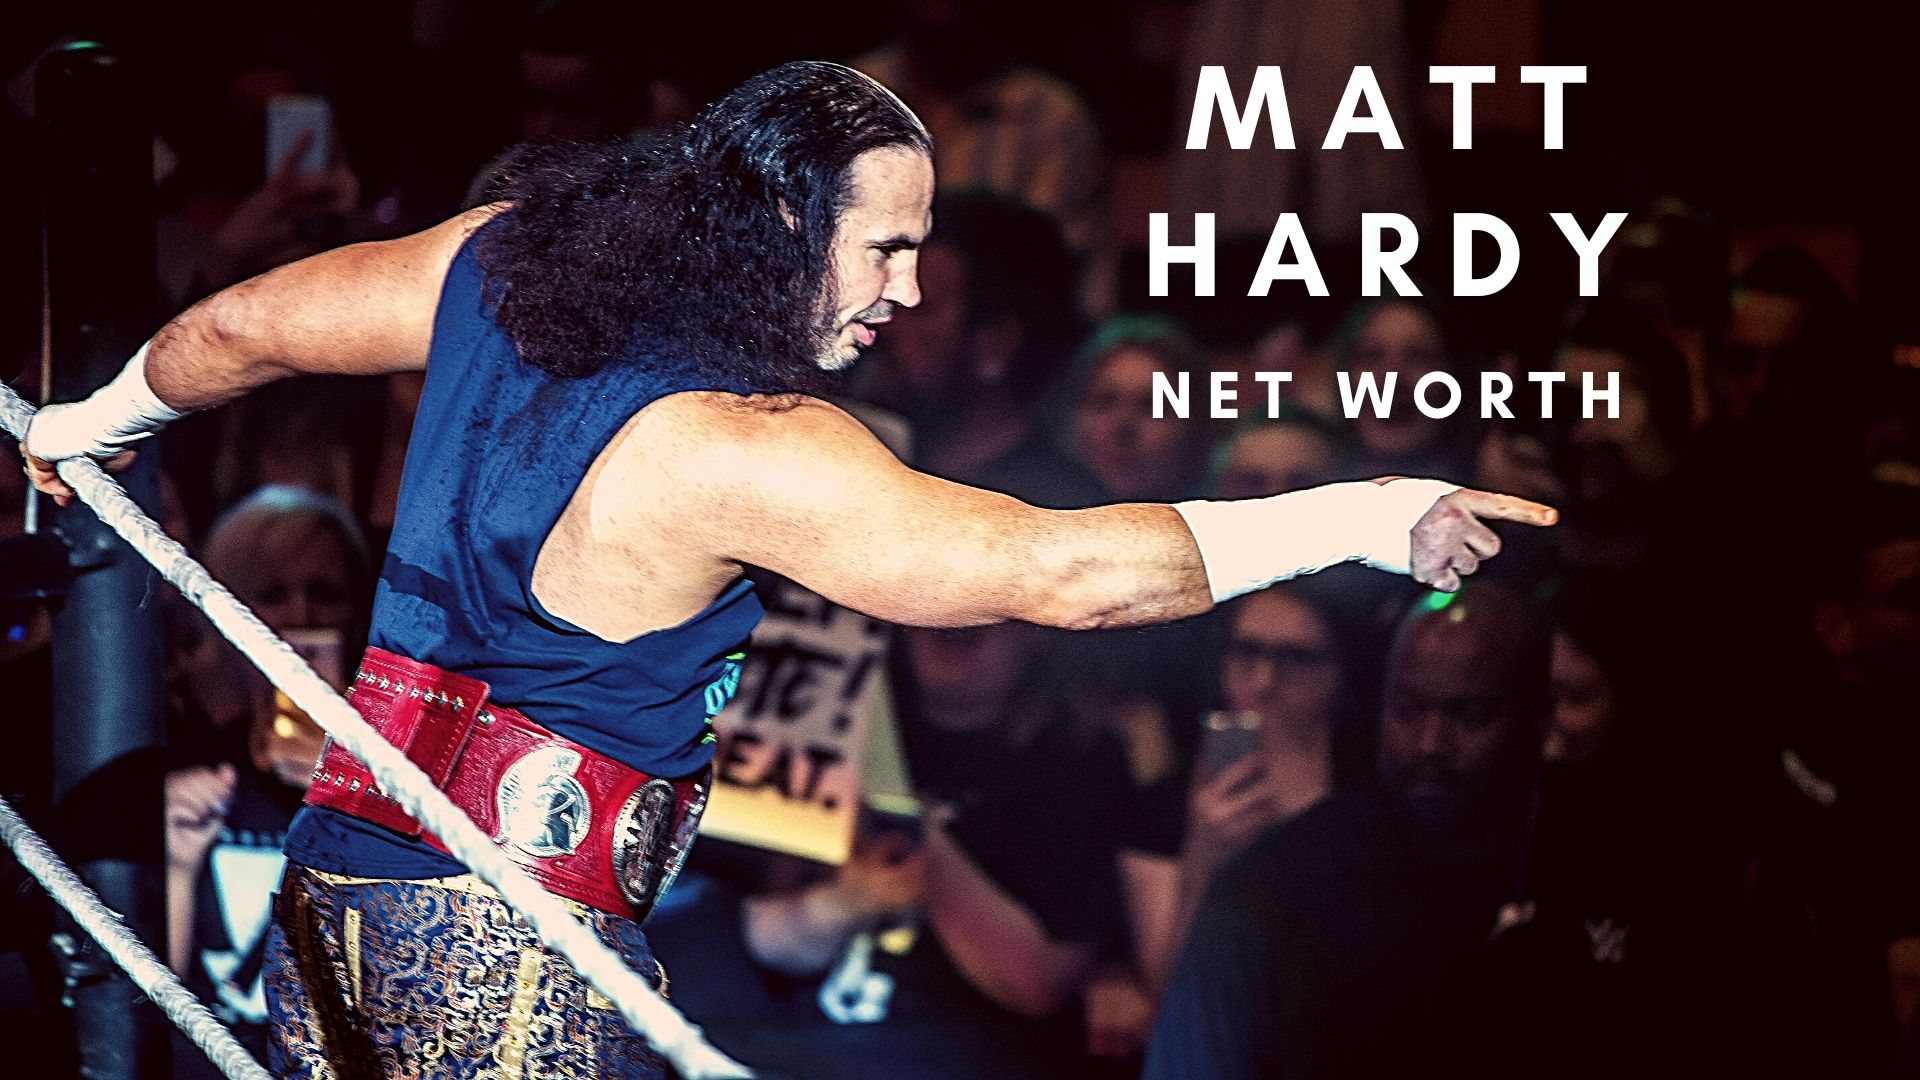 Matt Hardy has amassed a huge net worth thanks to his wrestling days in WWE and other promotions